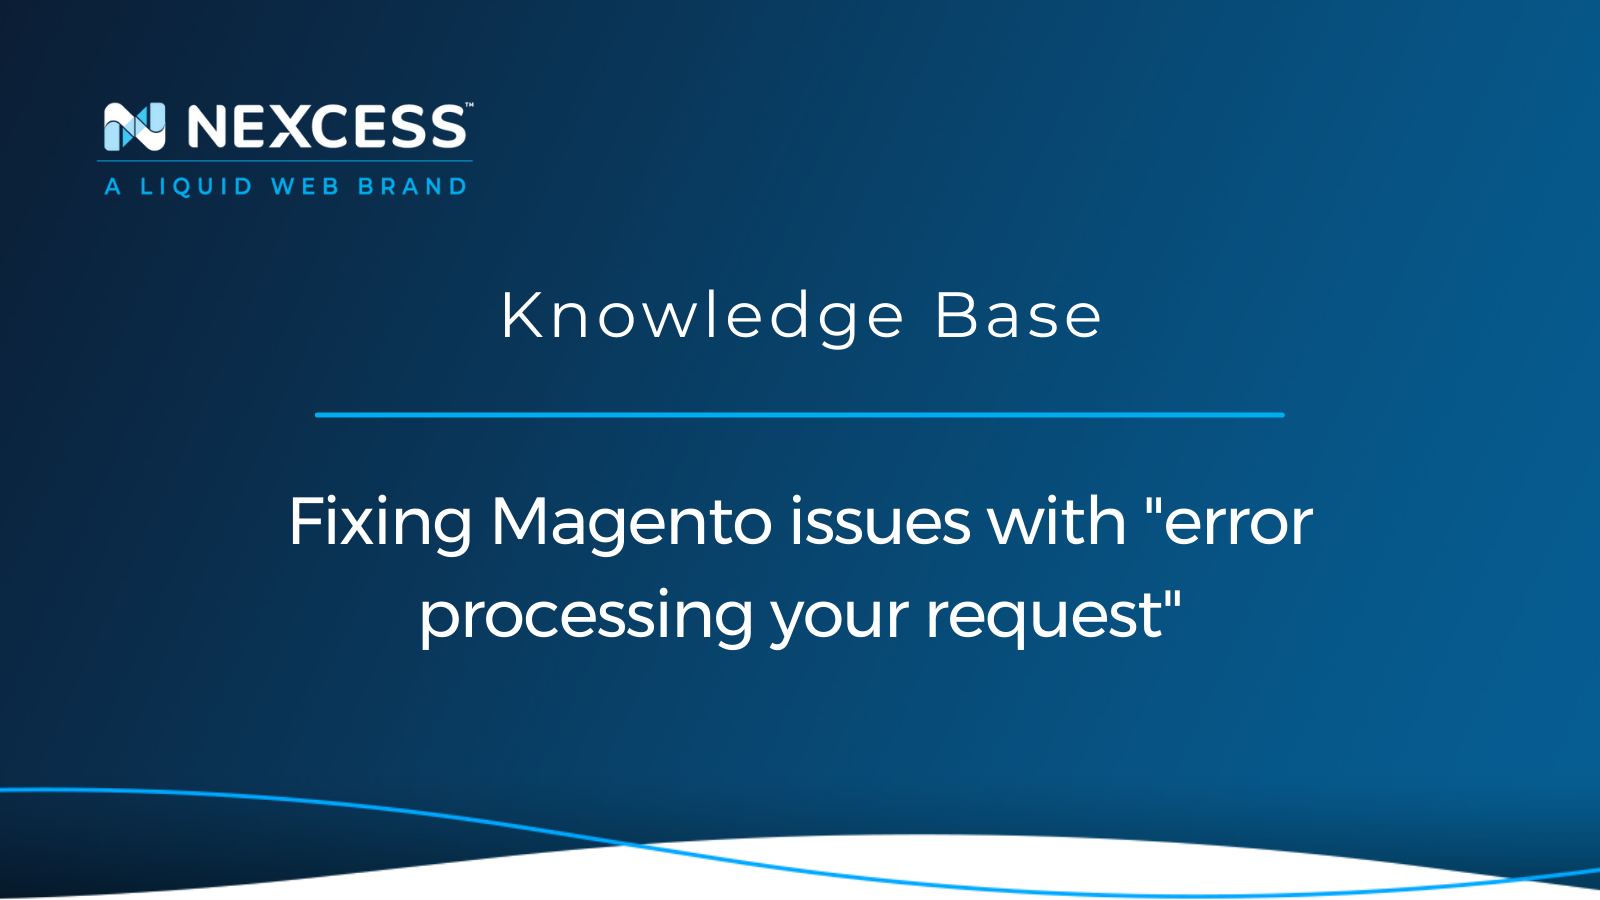 Fixing Magento issues with "error processing your request"